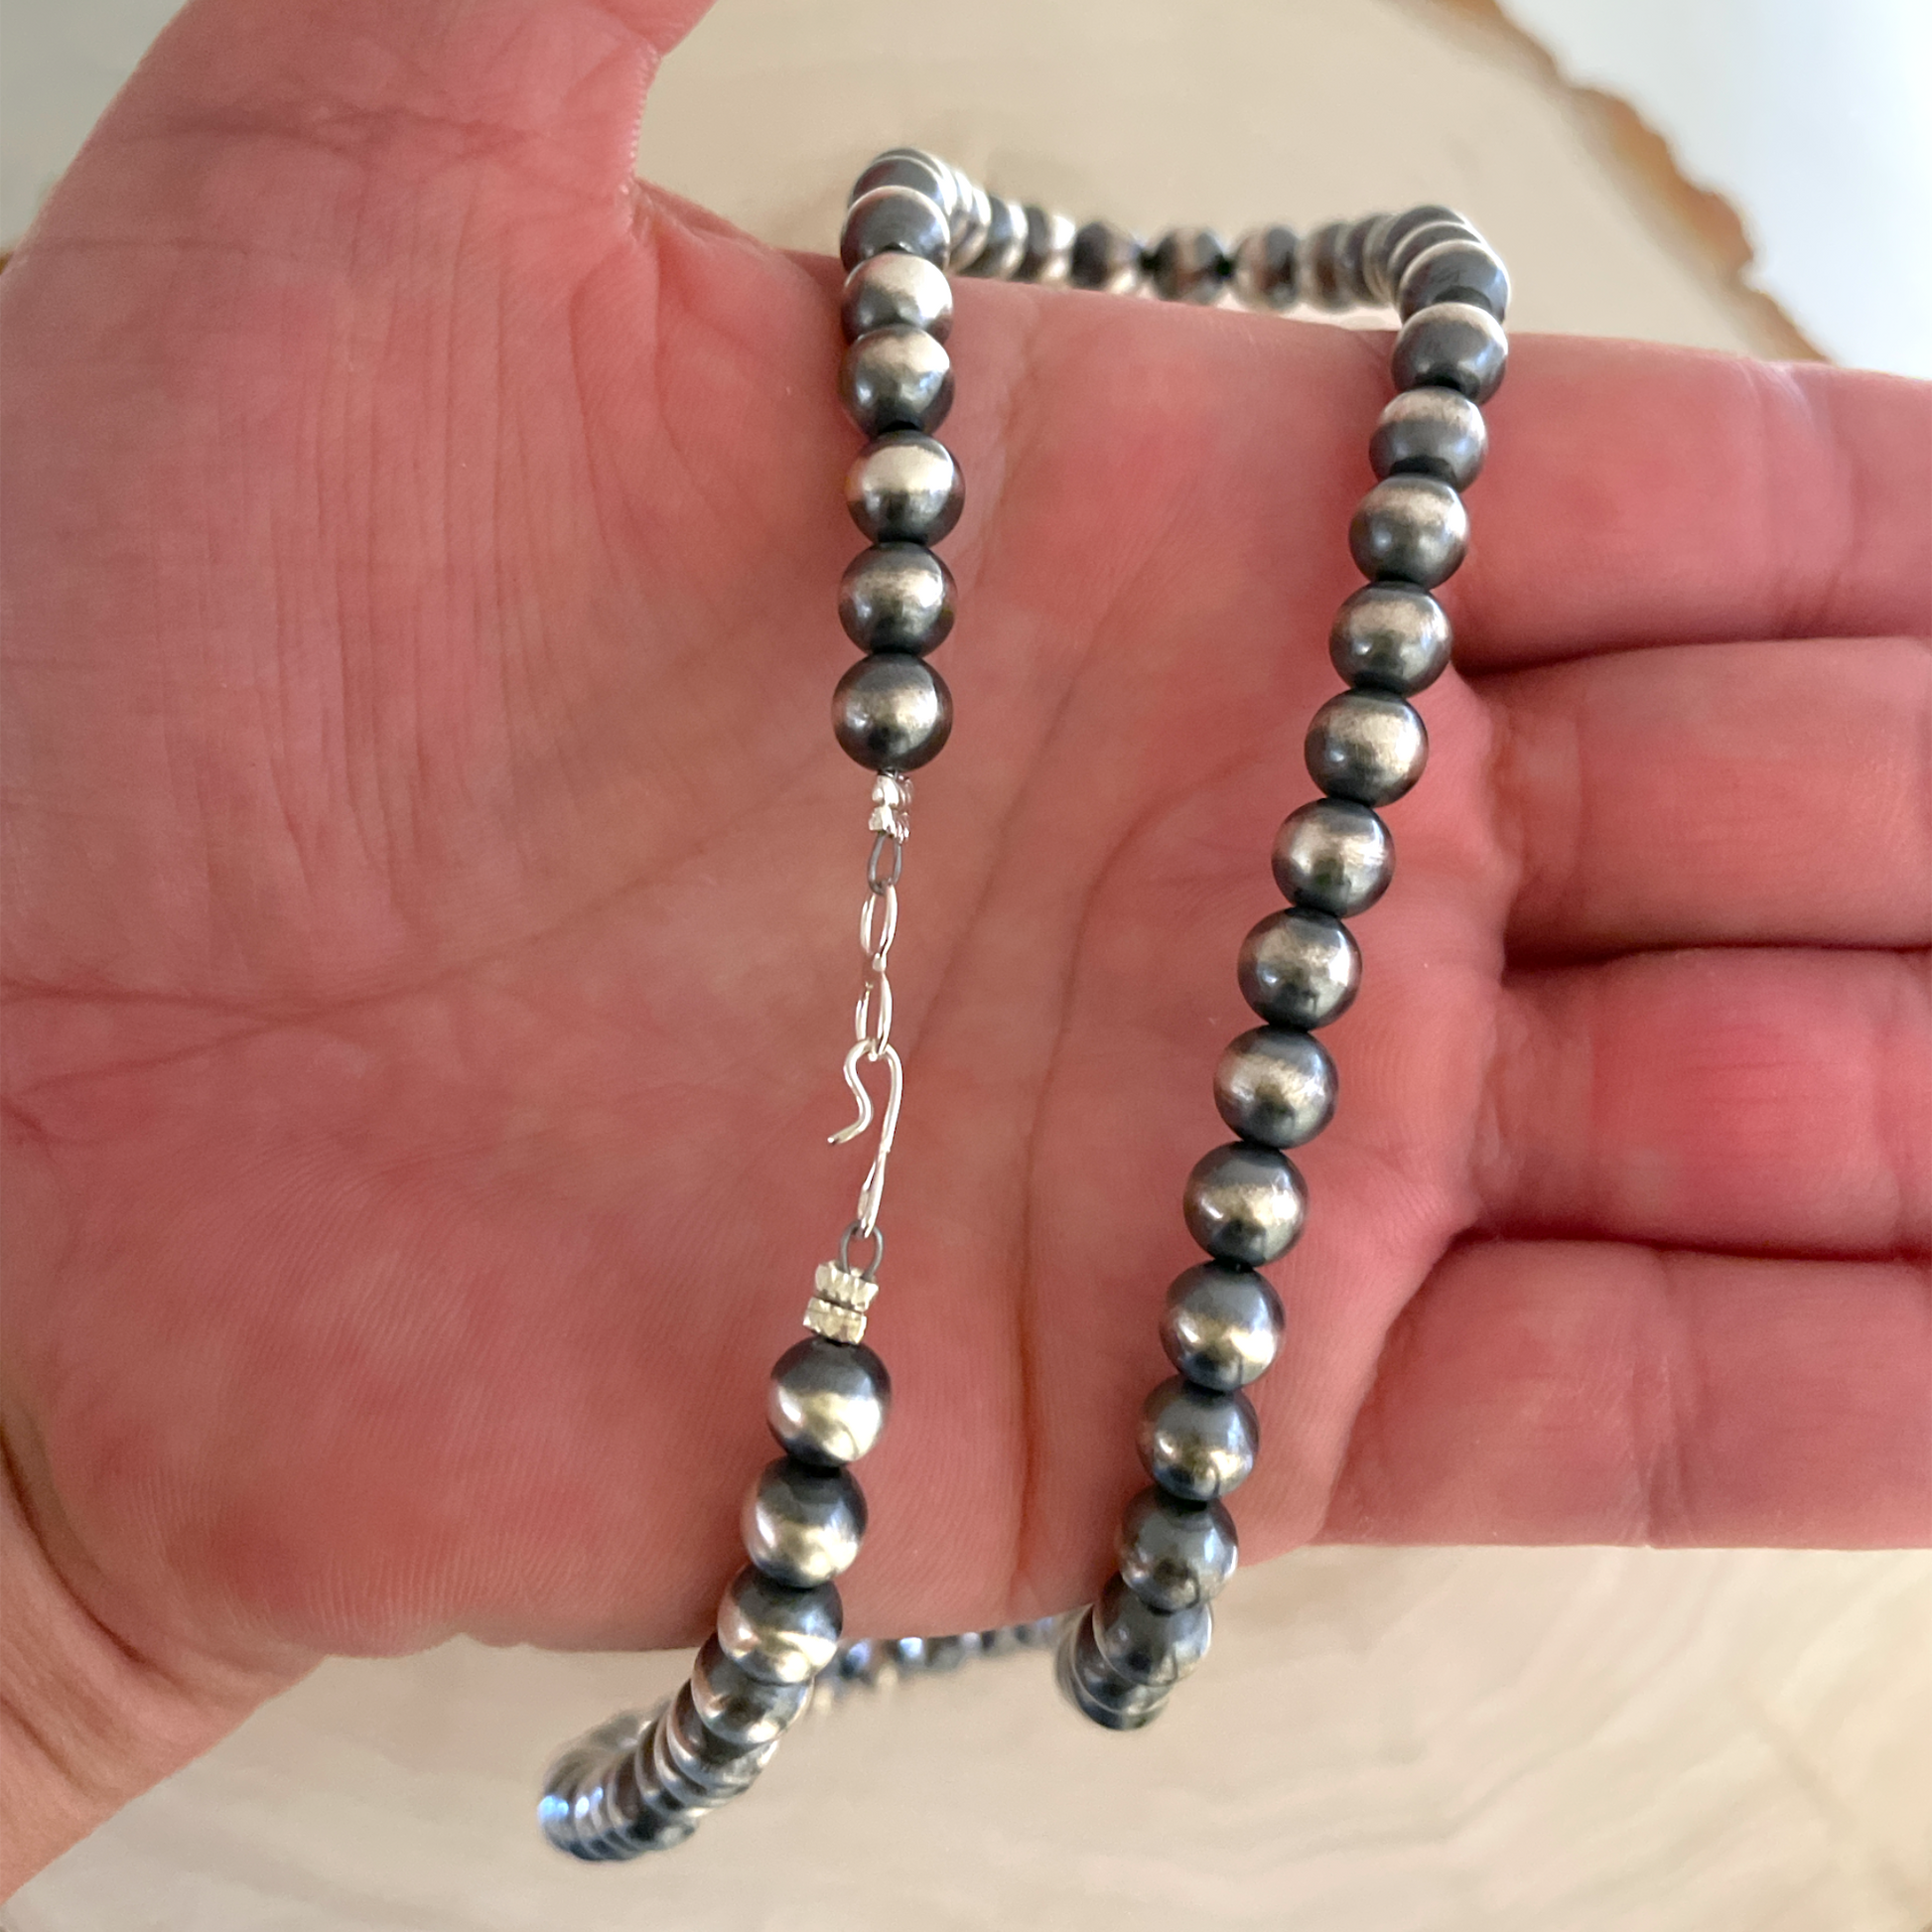 Round Oxidized Navajo Pearls Necklace 6mm - 18